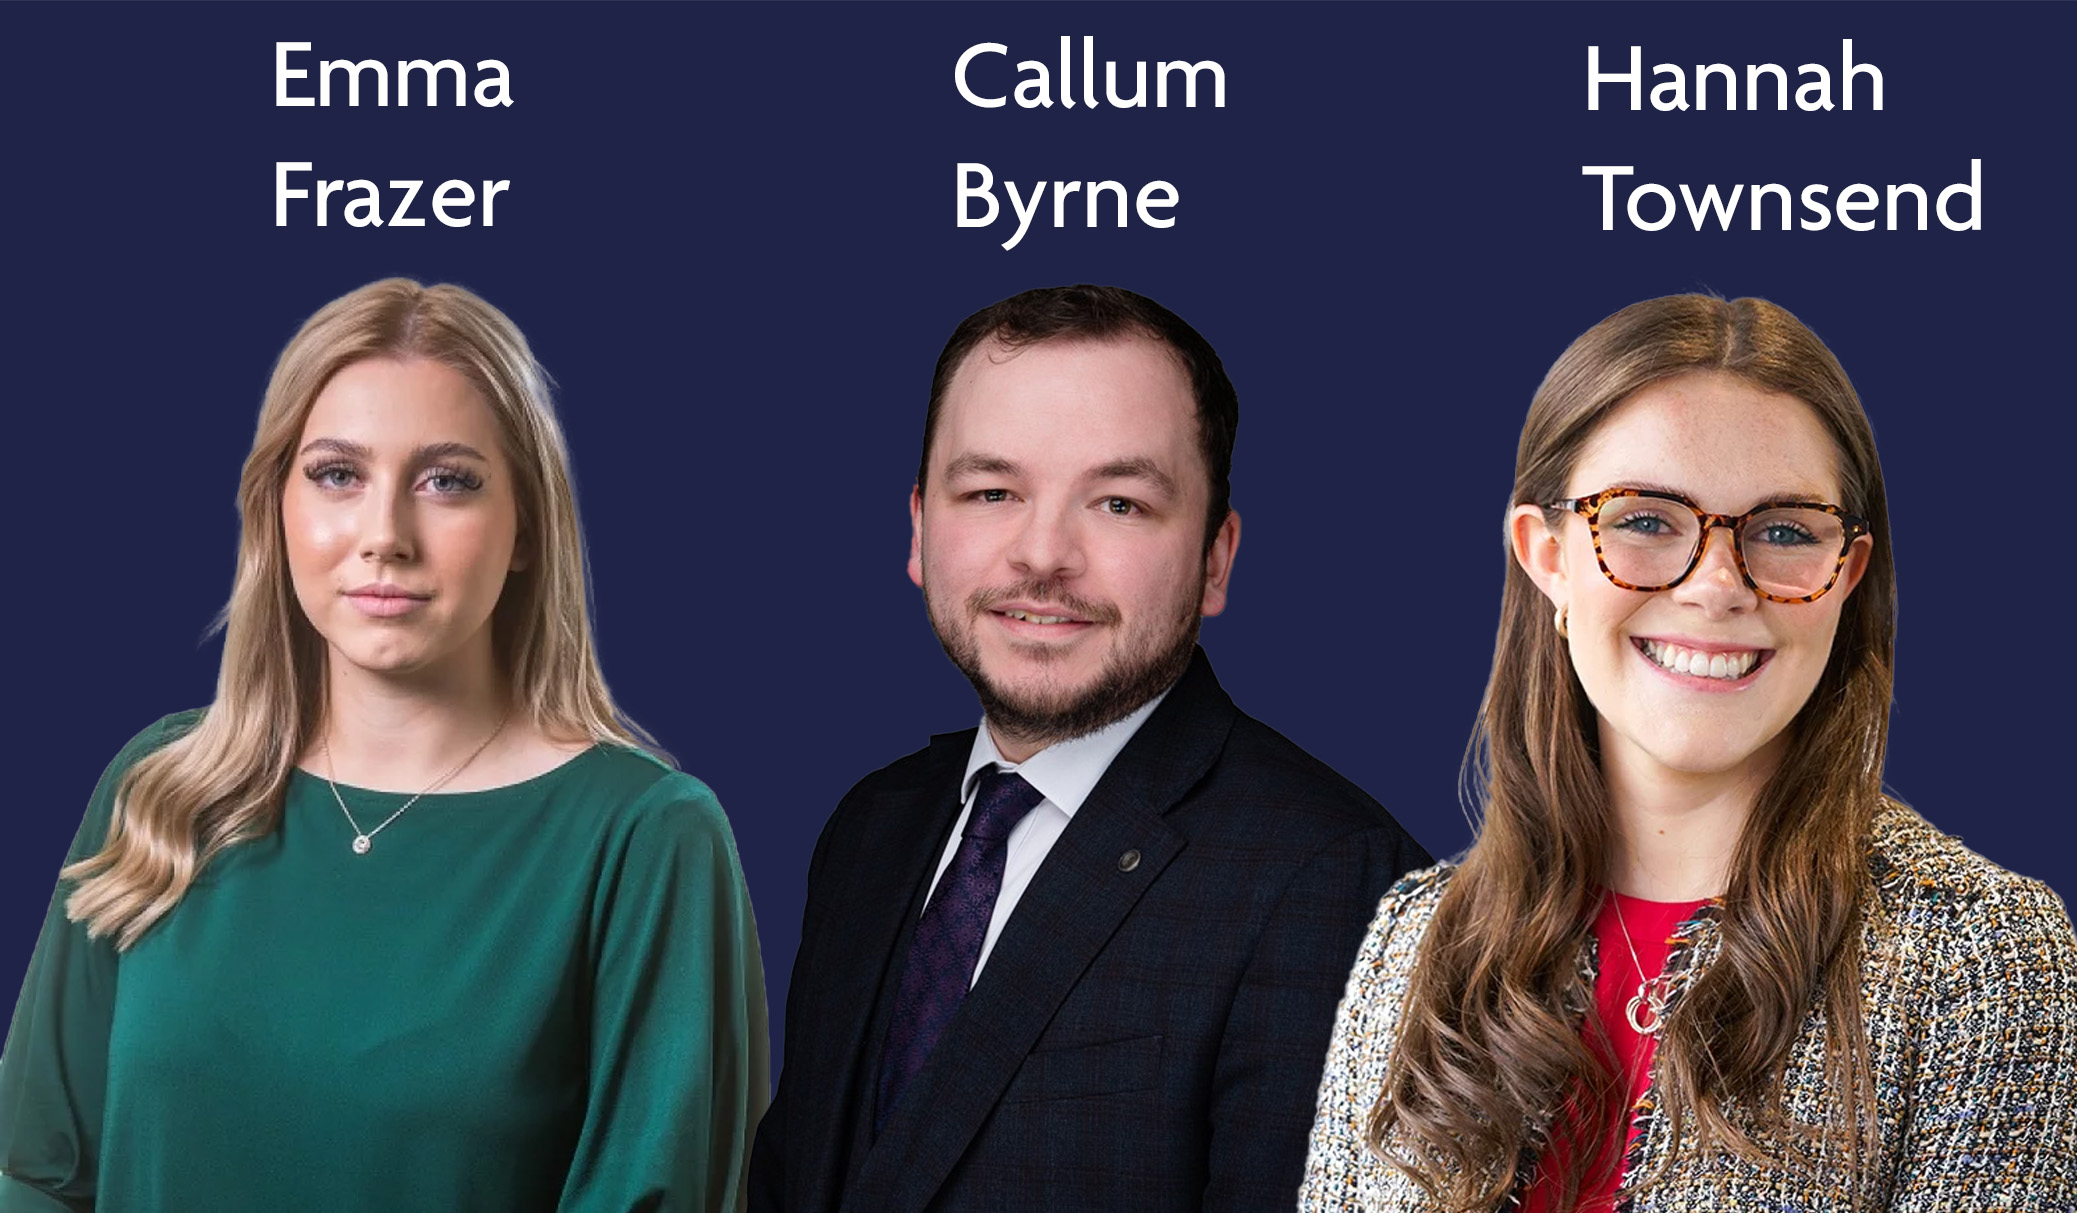 New clerking appointments at Parklane Plowden